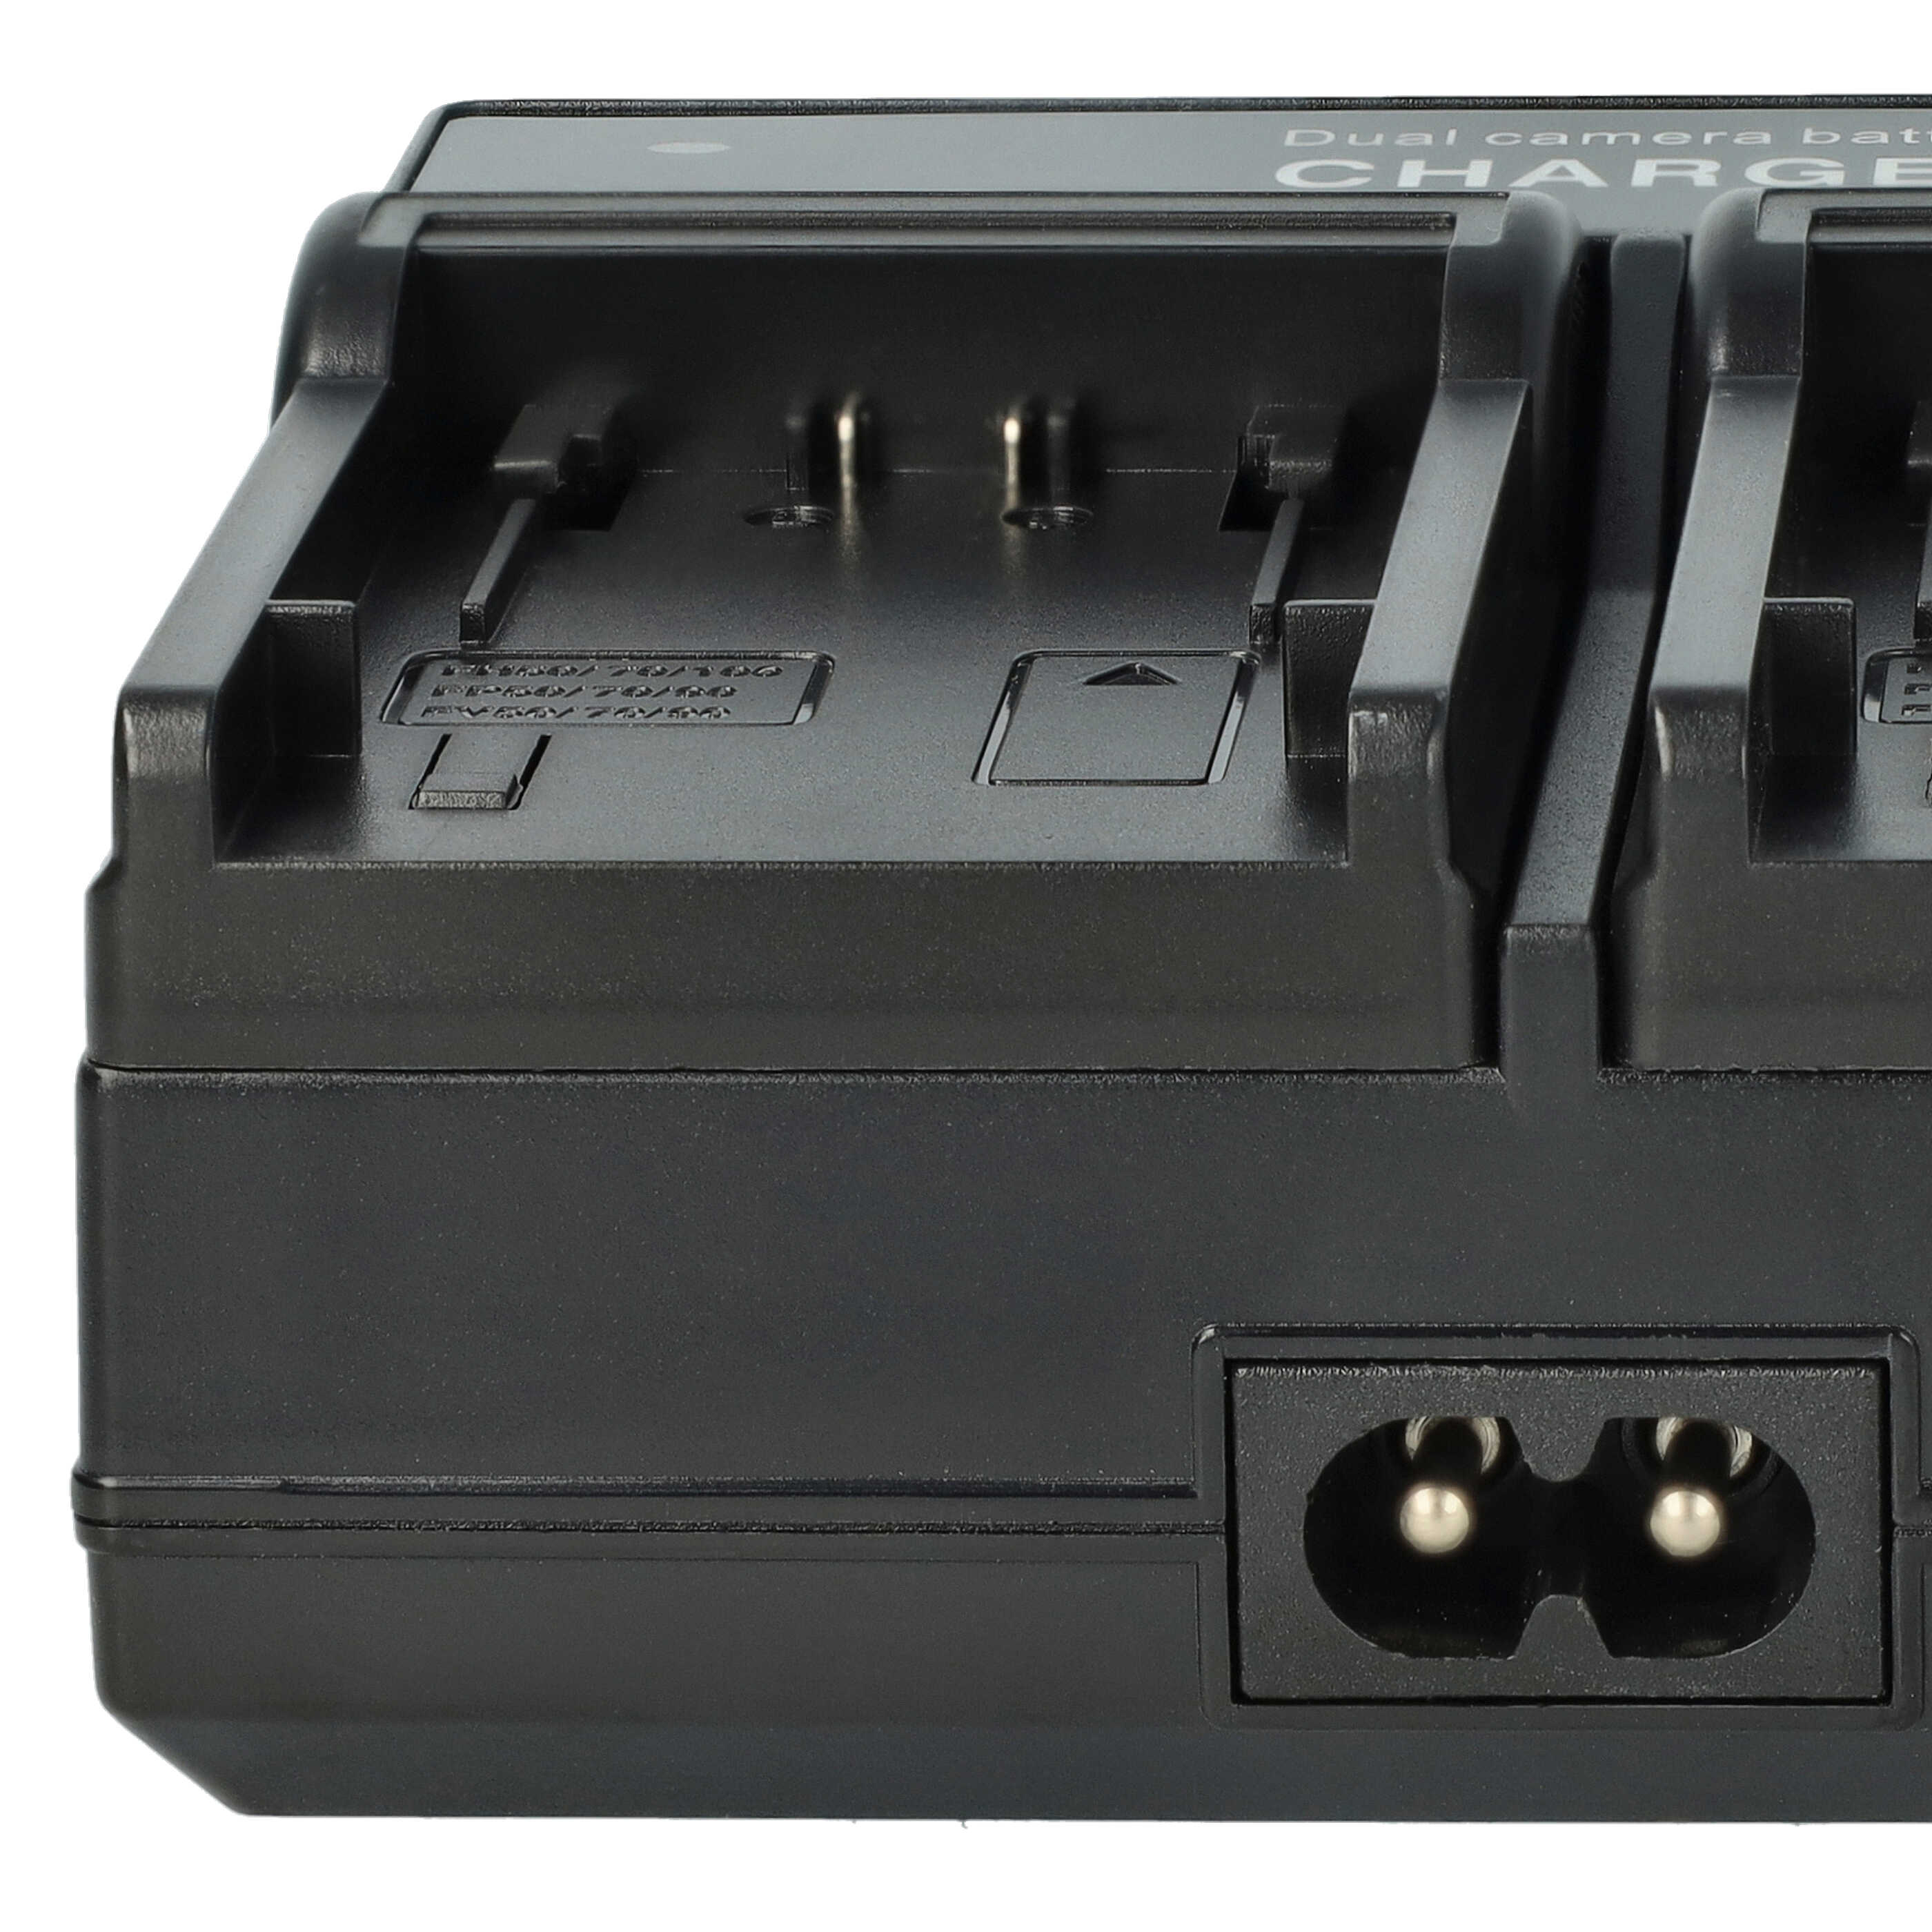 Battery Charger suitable for Sony NP-FP30 Camera etc. - 0.5 / 0.9 A, 4.2/8.4 V